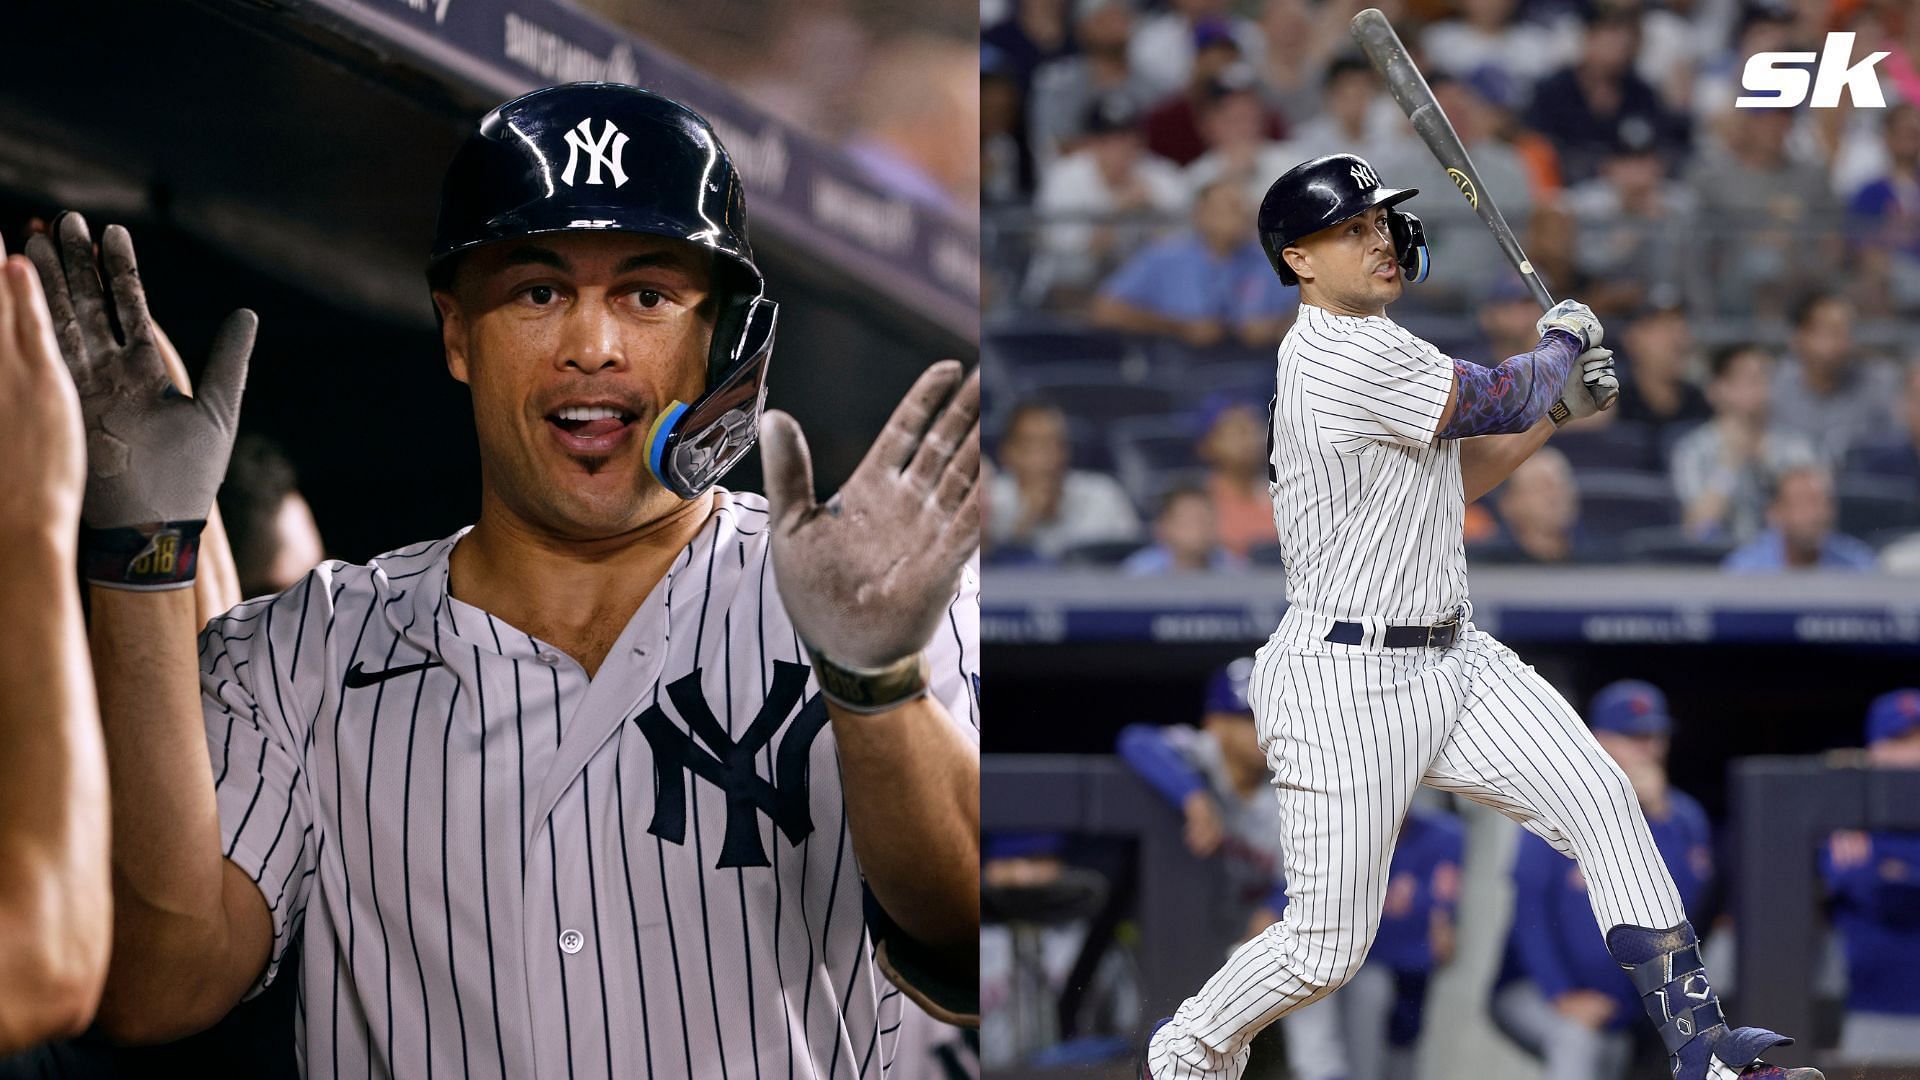 Giancarlo Stanton: Get to know the new Yankees slugger – New York